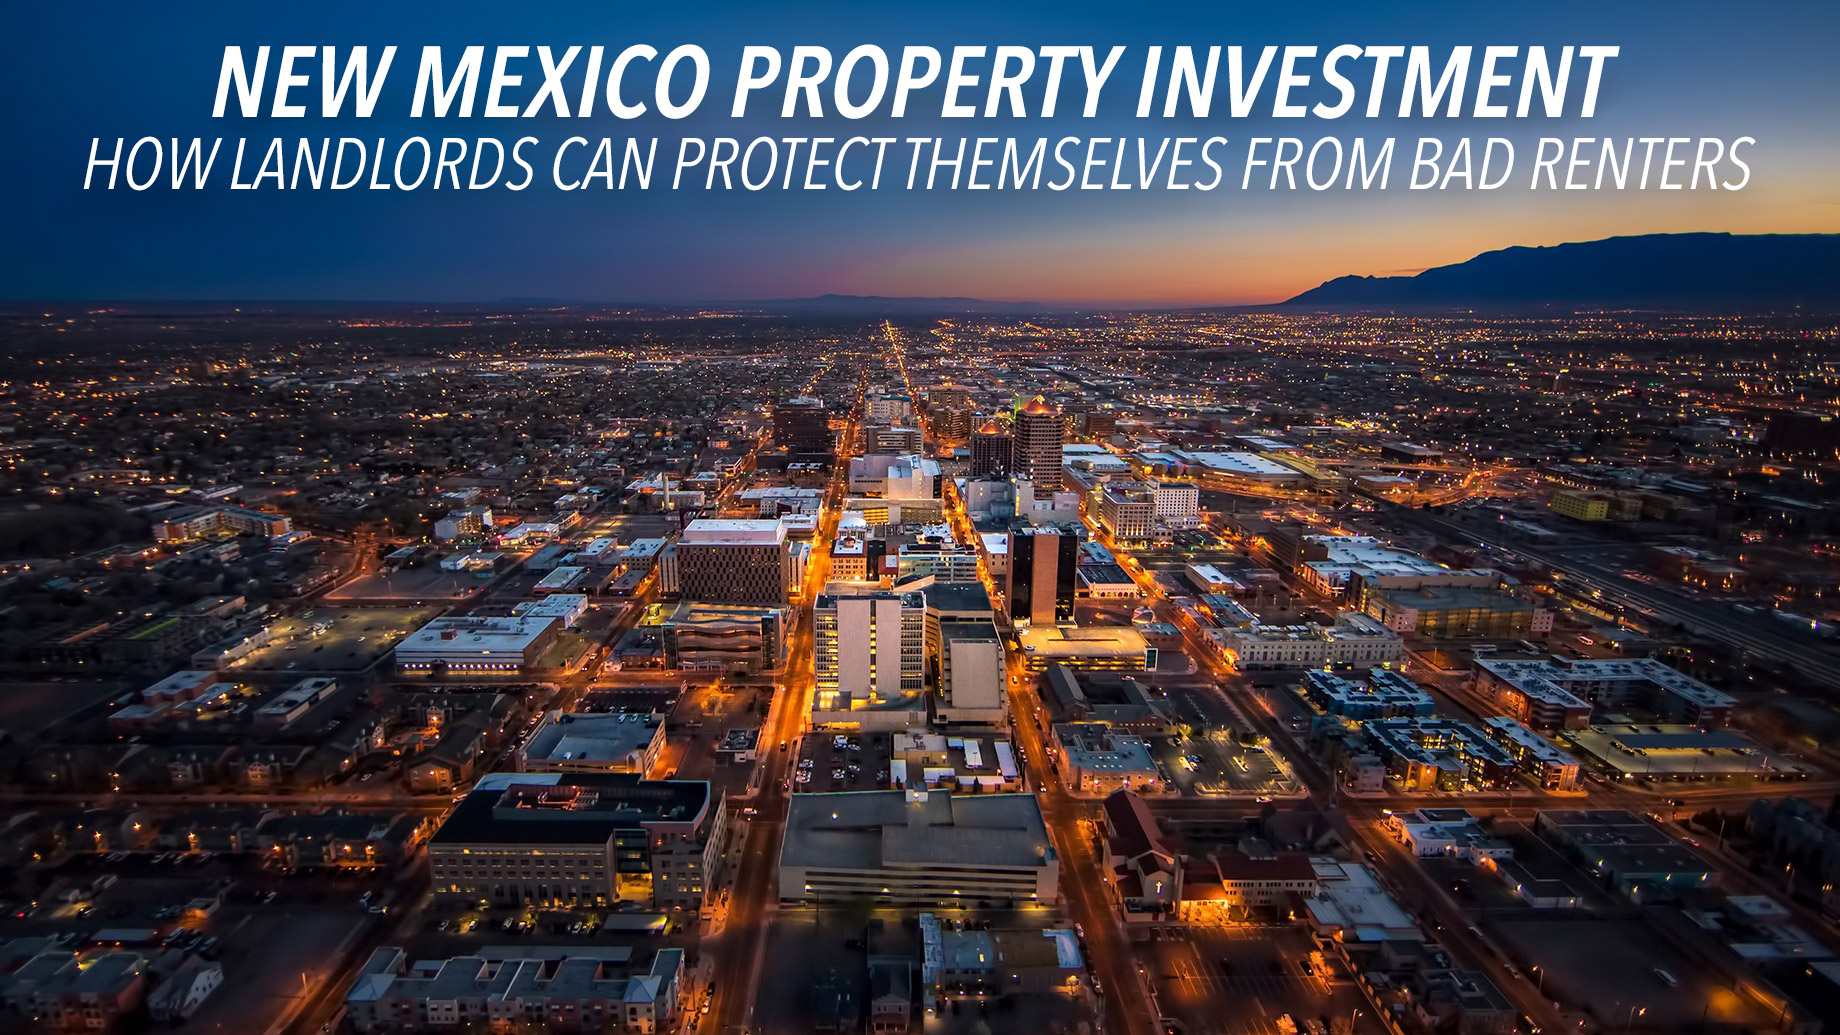 New Mexico Property Investment - How Landlords Can Protect Themselves From Bad Renters